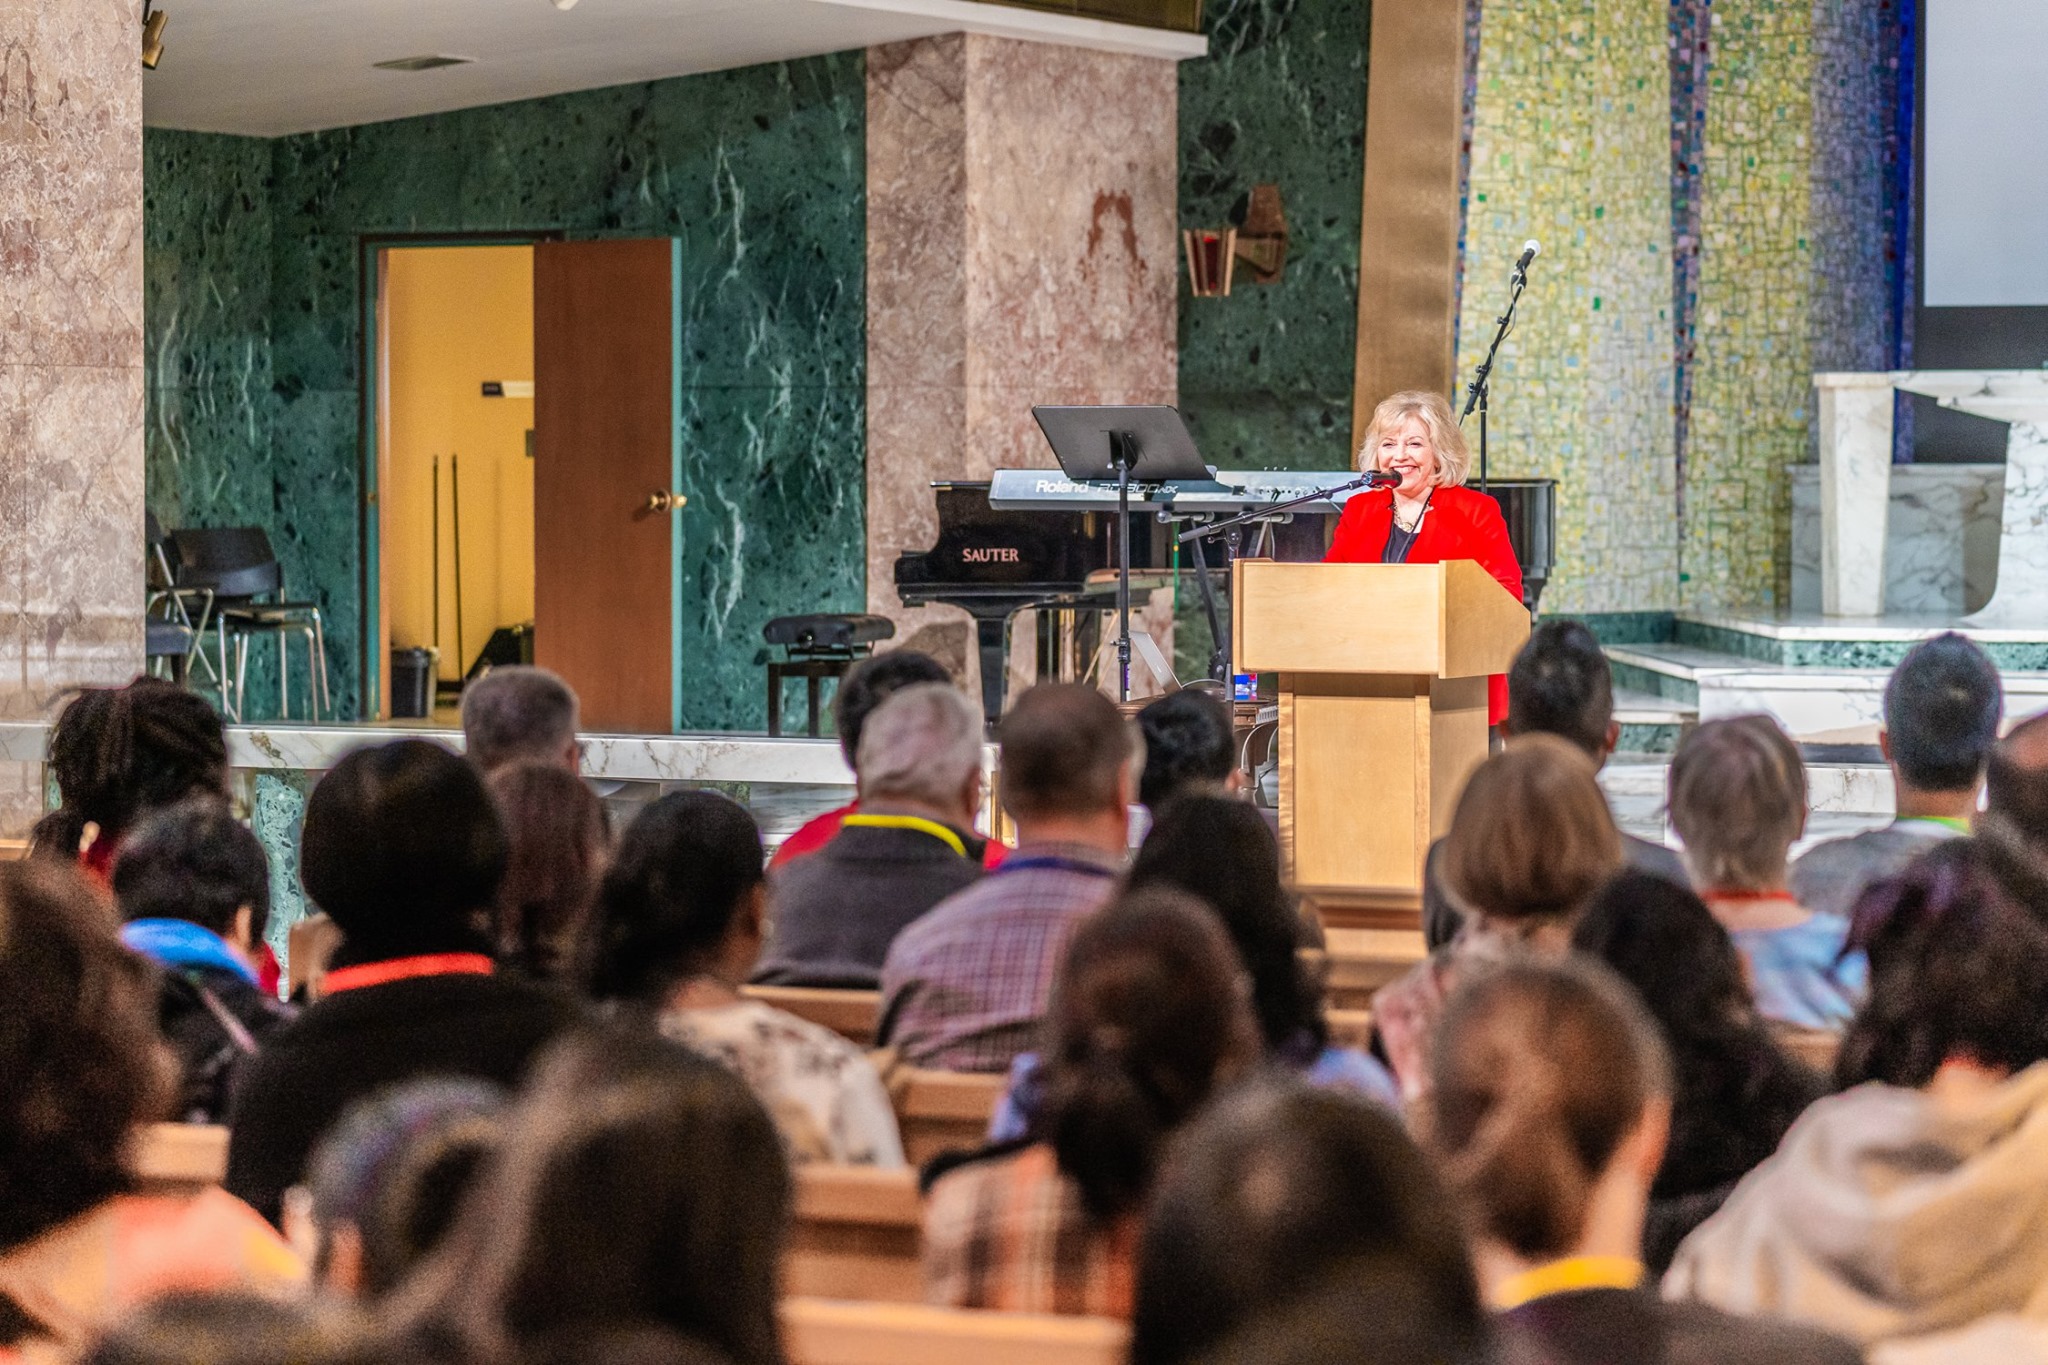 Keynote session with Dr. Holly Catterton Allen at the Toronto Children's Ministry Conference 2019